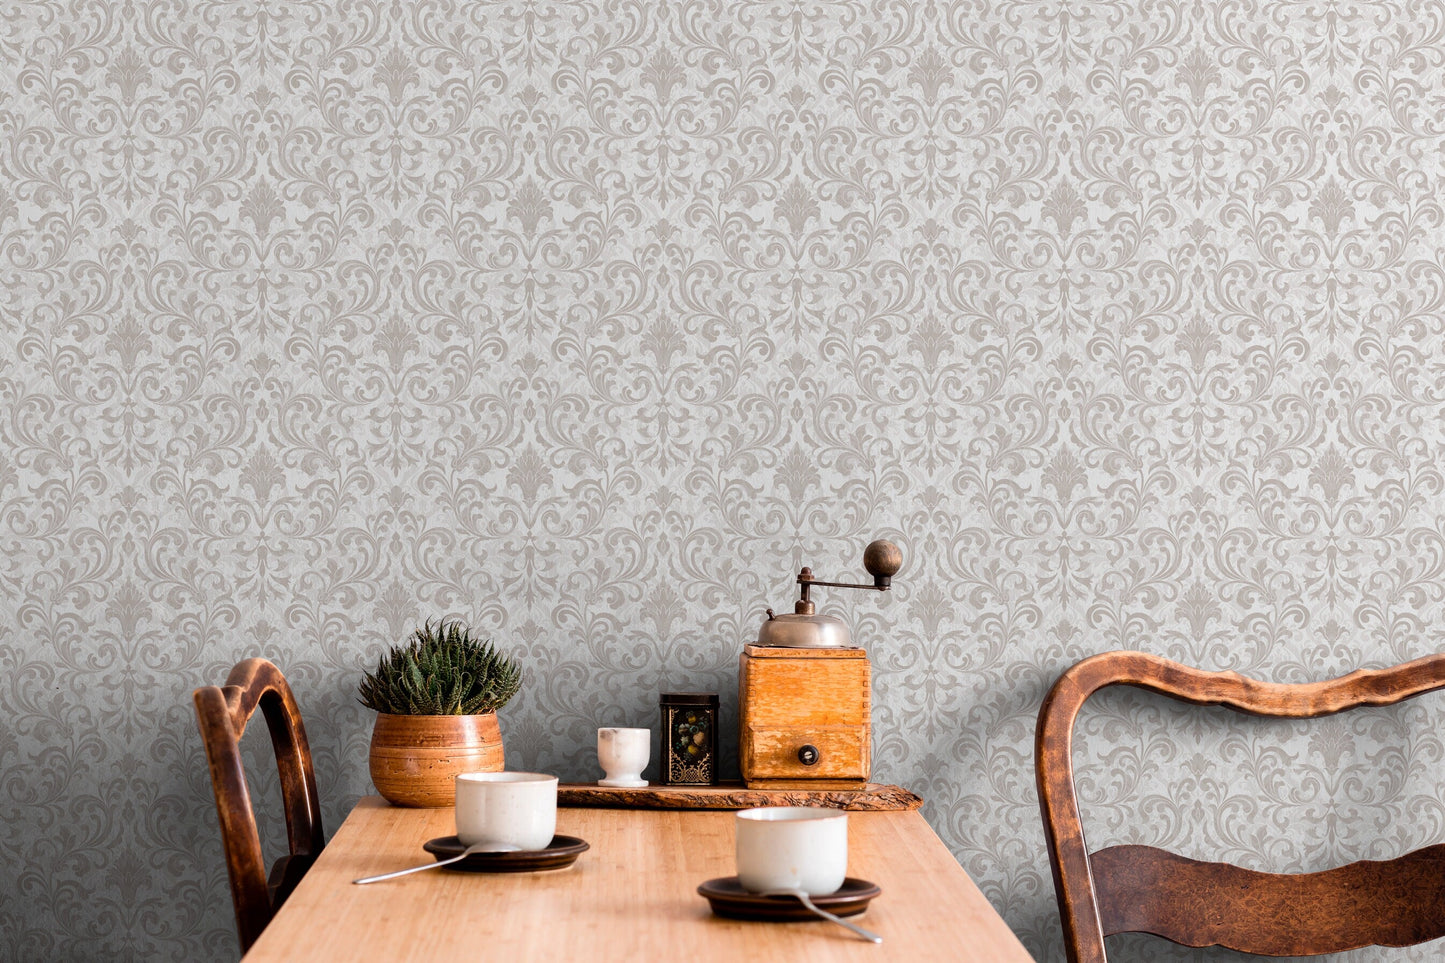 Wallpaper Removable Wall Mural Vintage Decor Wall Covering Home Decor Wallpaper Temporary Wallpaper - C186